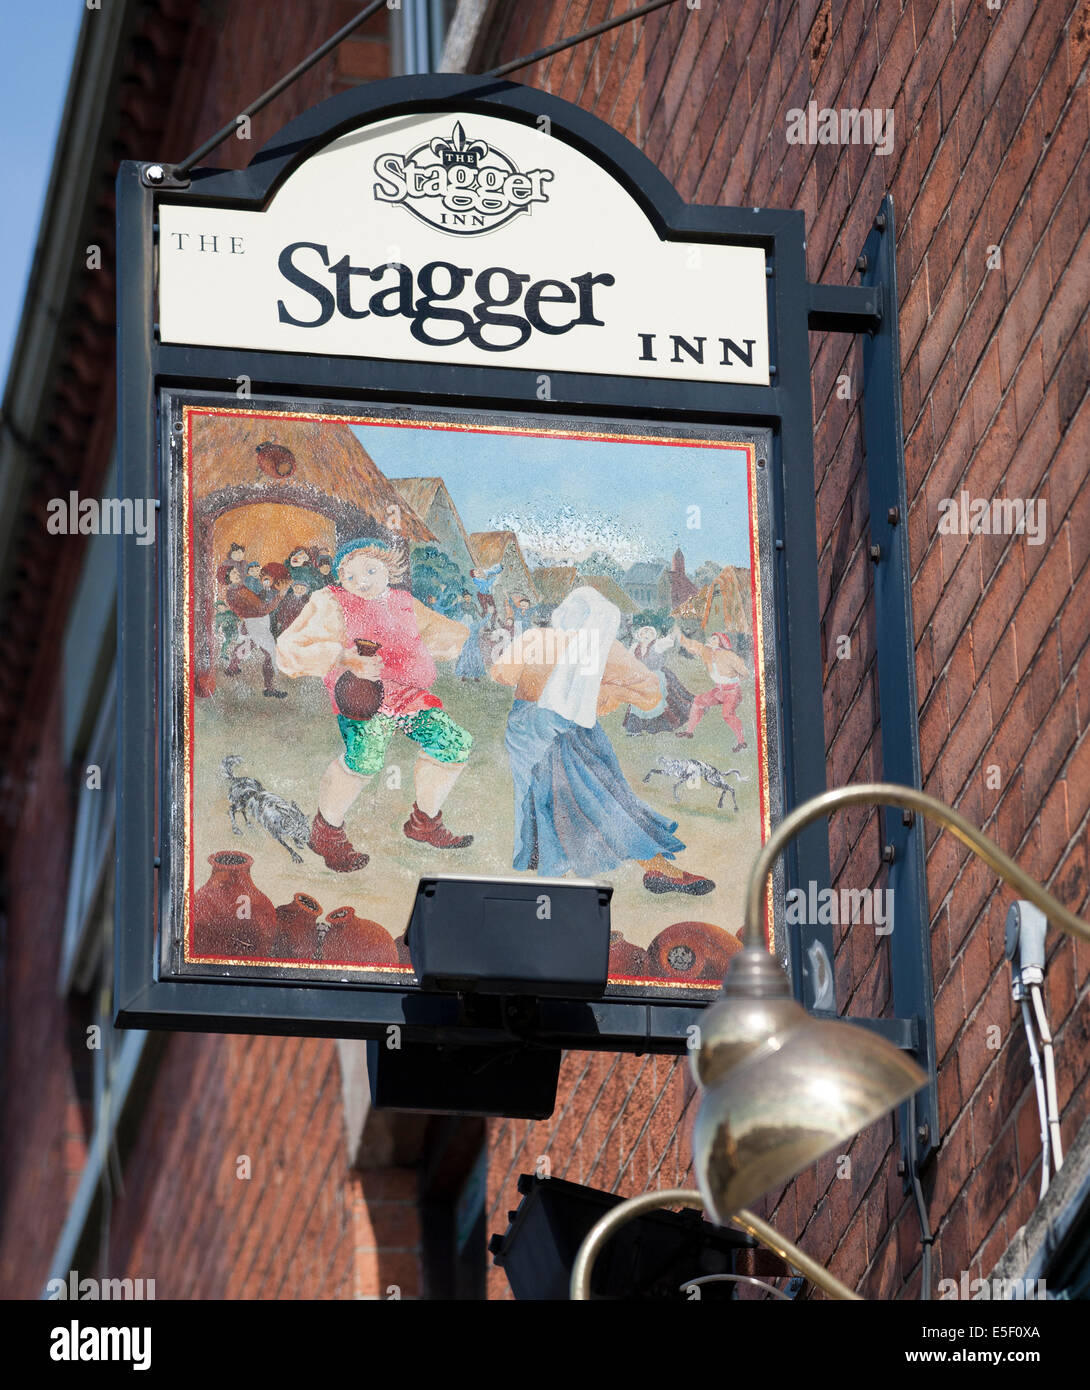 Hanging pub sign for The Stagger Inn, London Road, Grantham, Lincolnshire, England, UK. Stock Photo